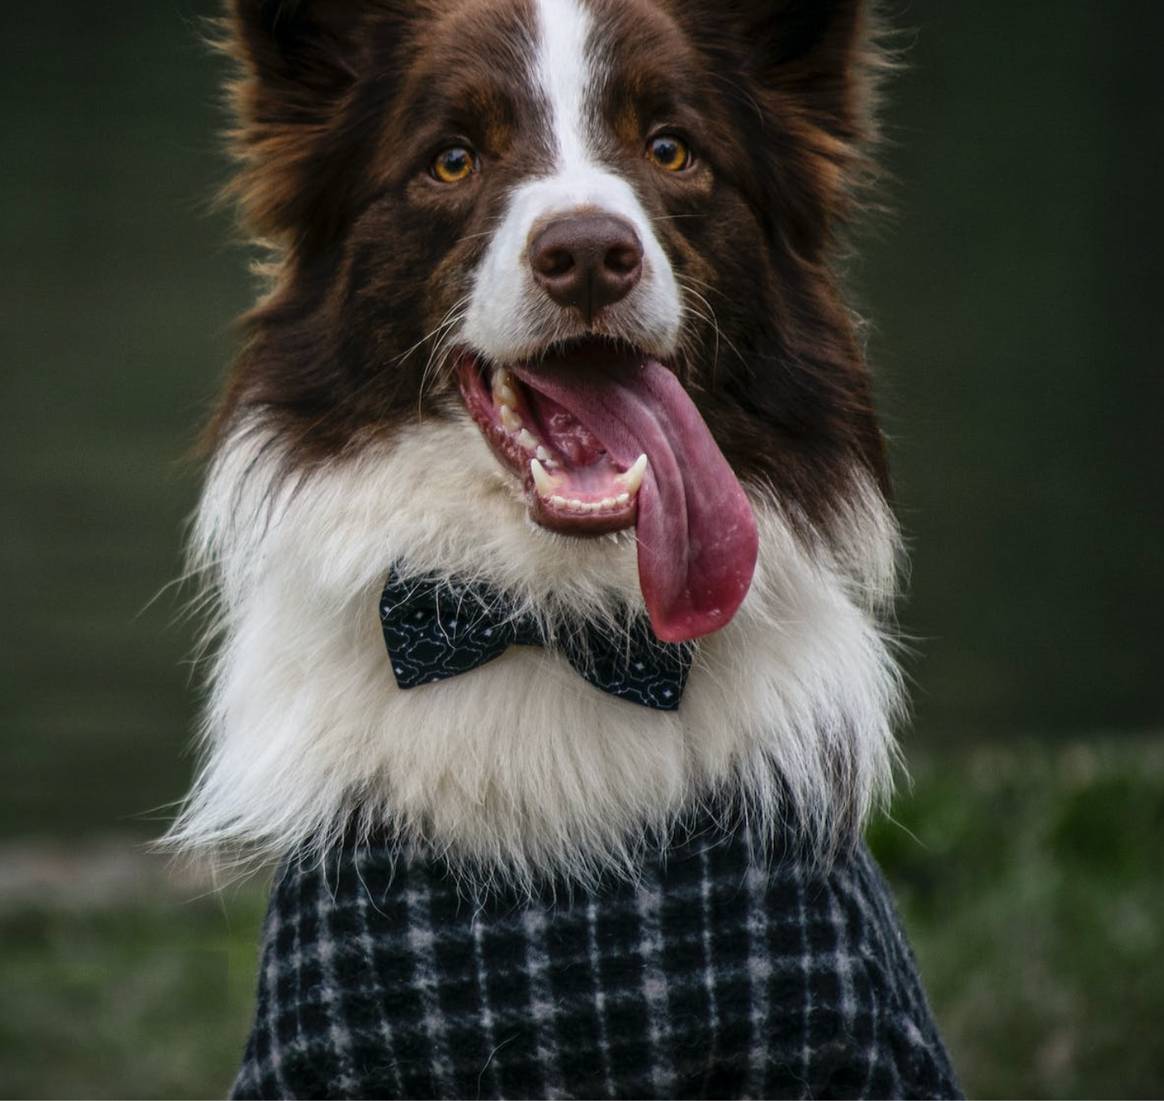 Border collie with bow and sweater. Credits: Robledo Rafael Andrade / Pexels